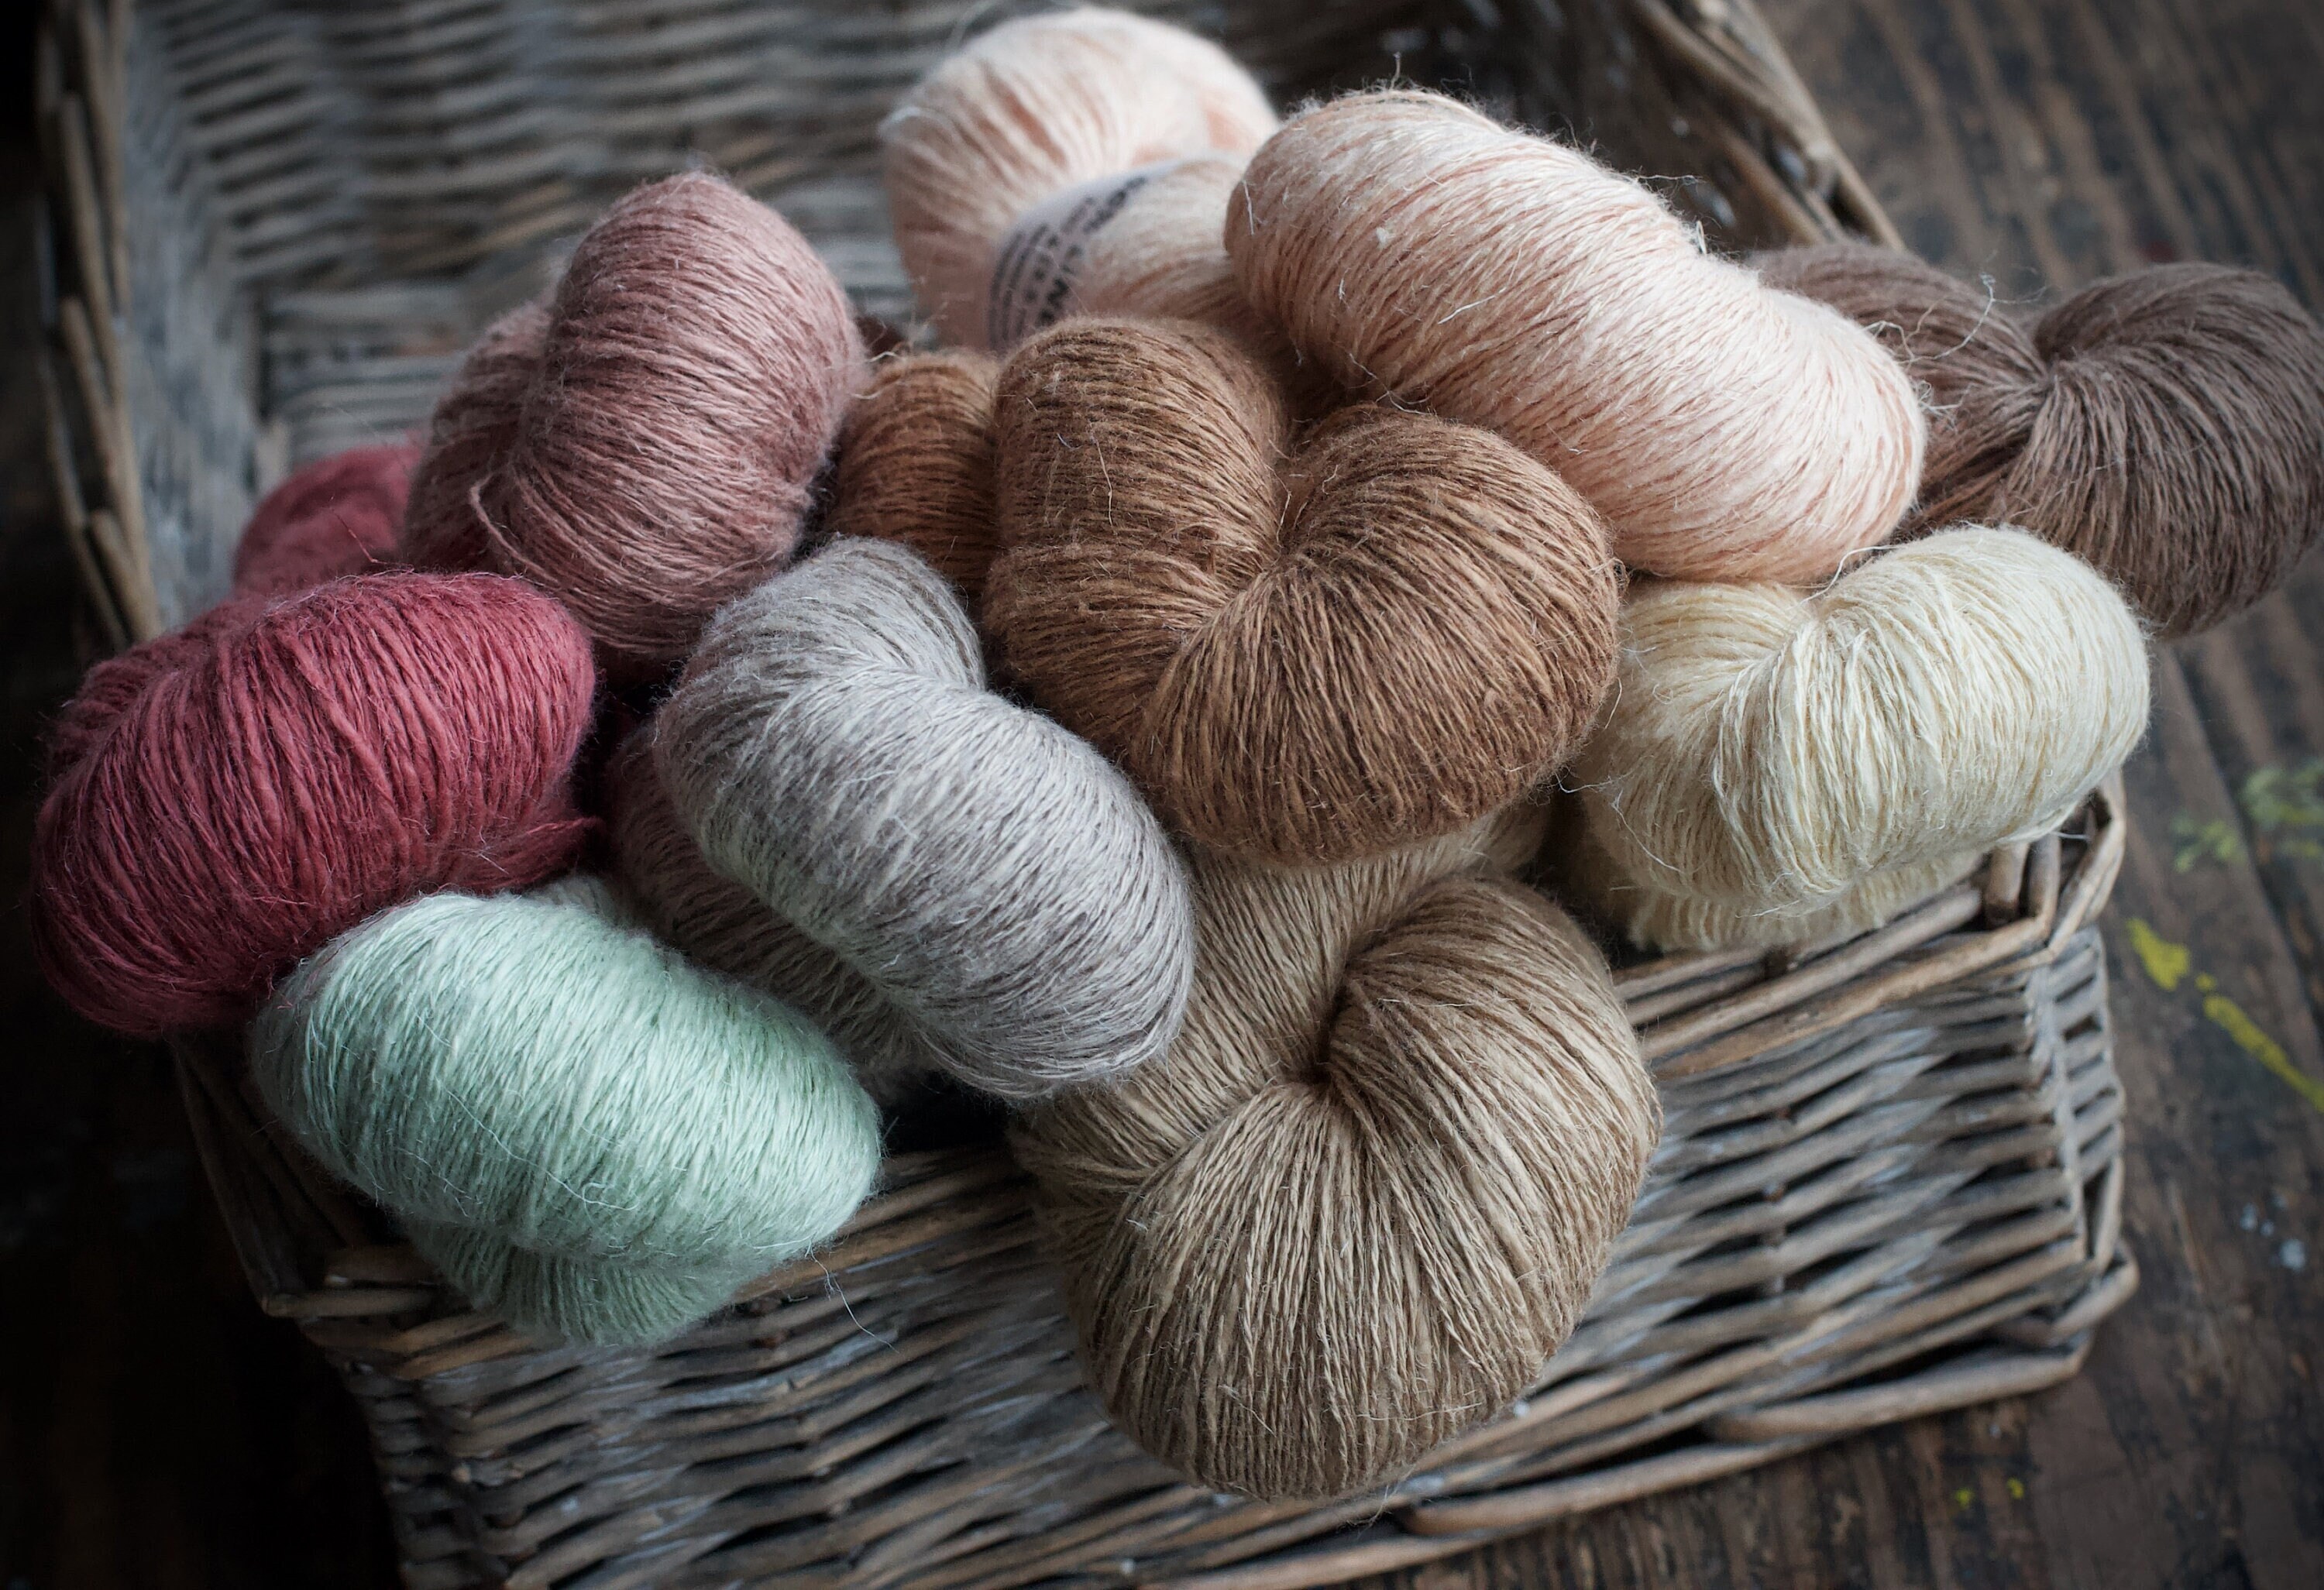 Premium Milk Cotton Yarn in 86 Beautiful Colors DK Weight 80% Cotton 50g  Weight Ideal for Crochet 2mm-3mm Hook 